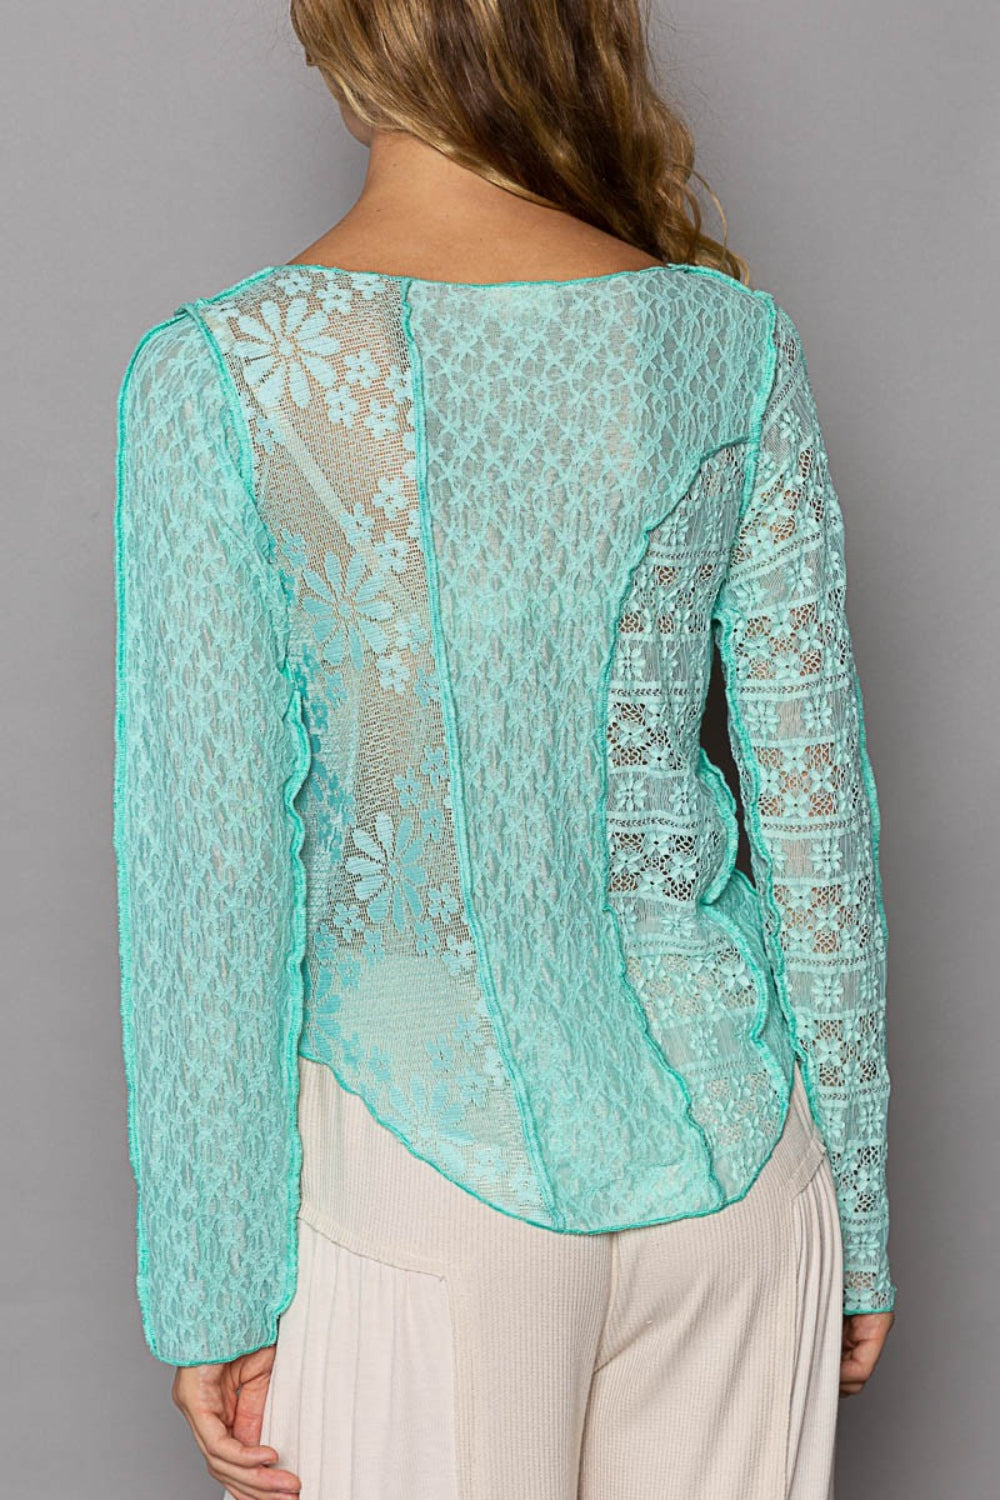 POL Exposed Seam Long Sleeve Lace Knit Top - Tigbul's Variety Fashion Shop